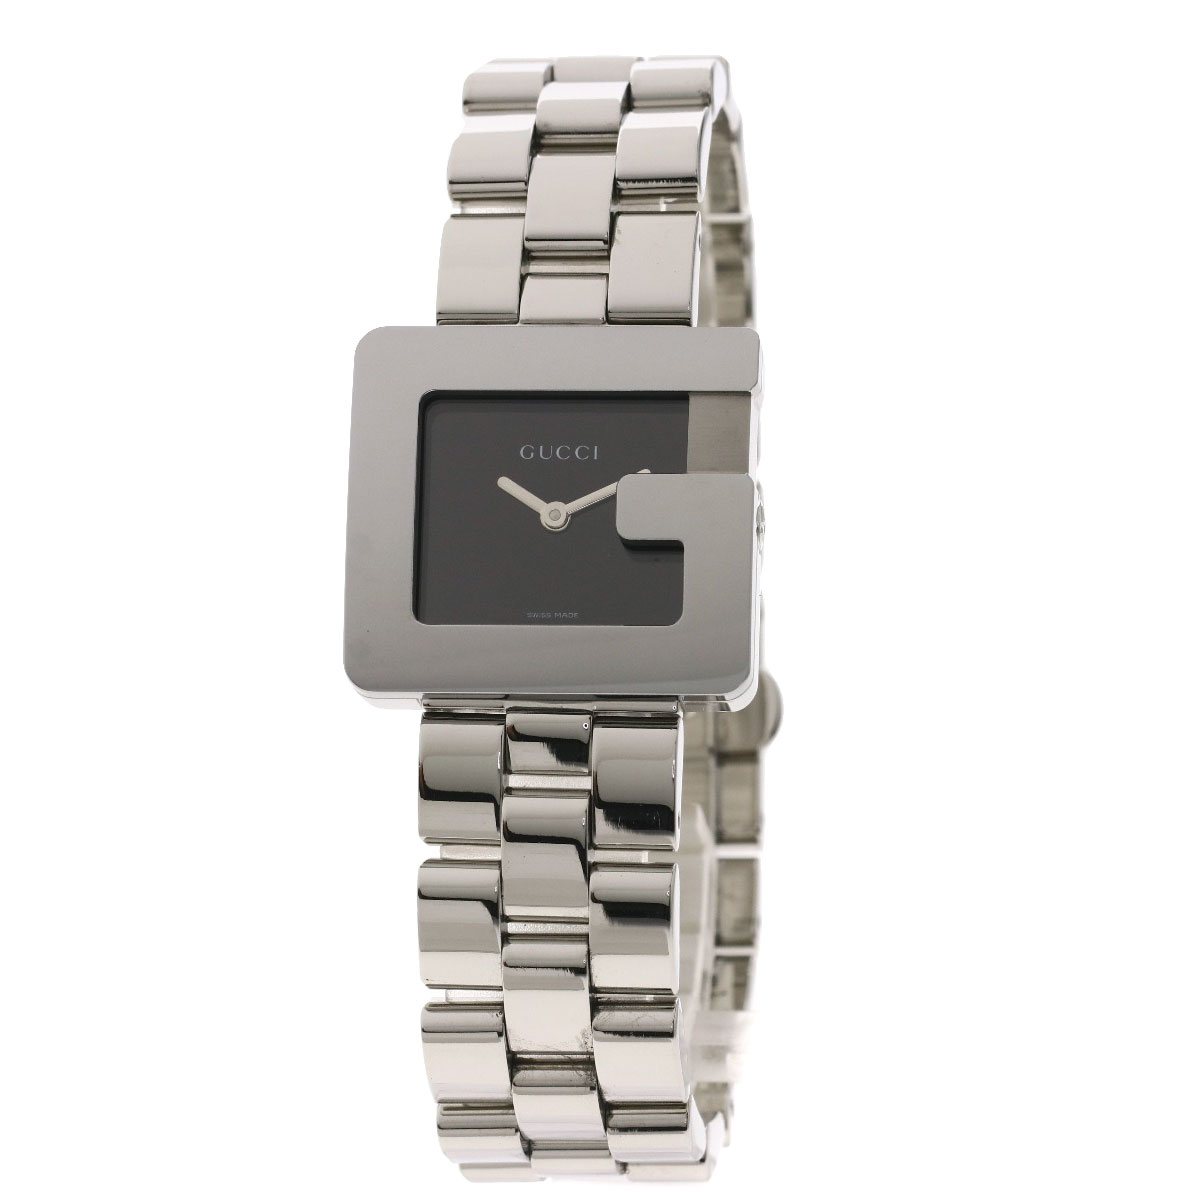 GUCCI Square face Watches 3600J Stainless Steel/Stainless Steel Ladies ...